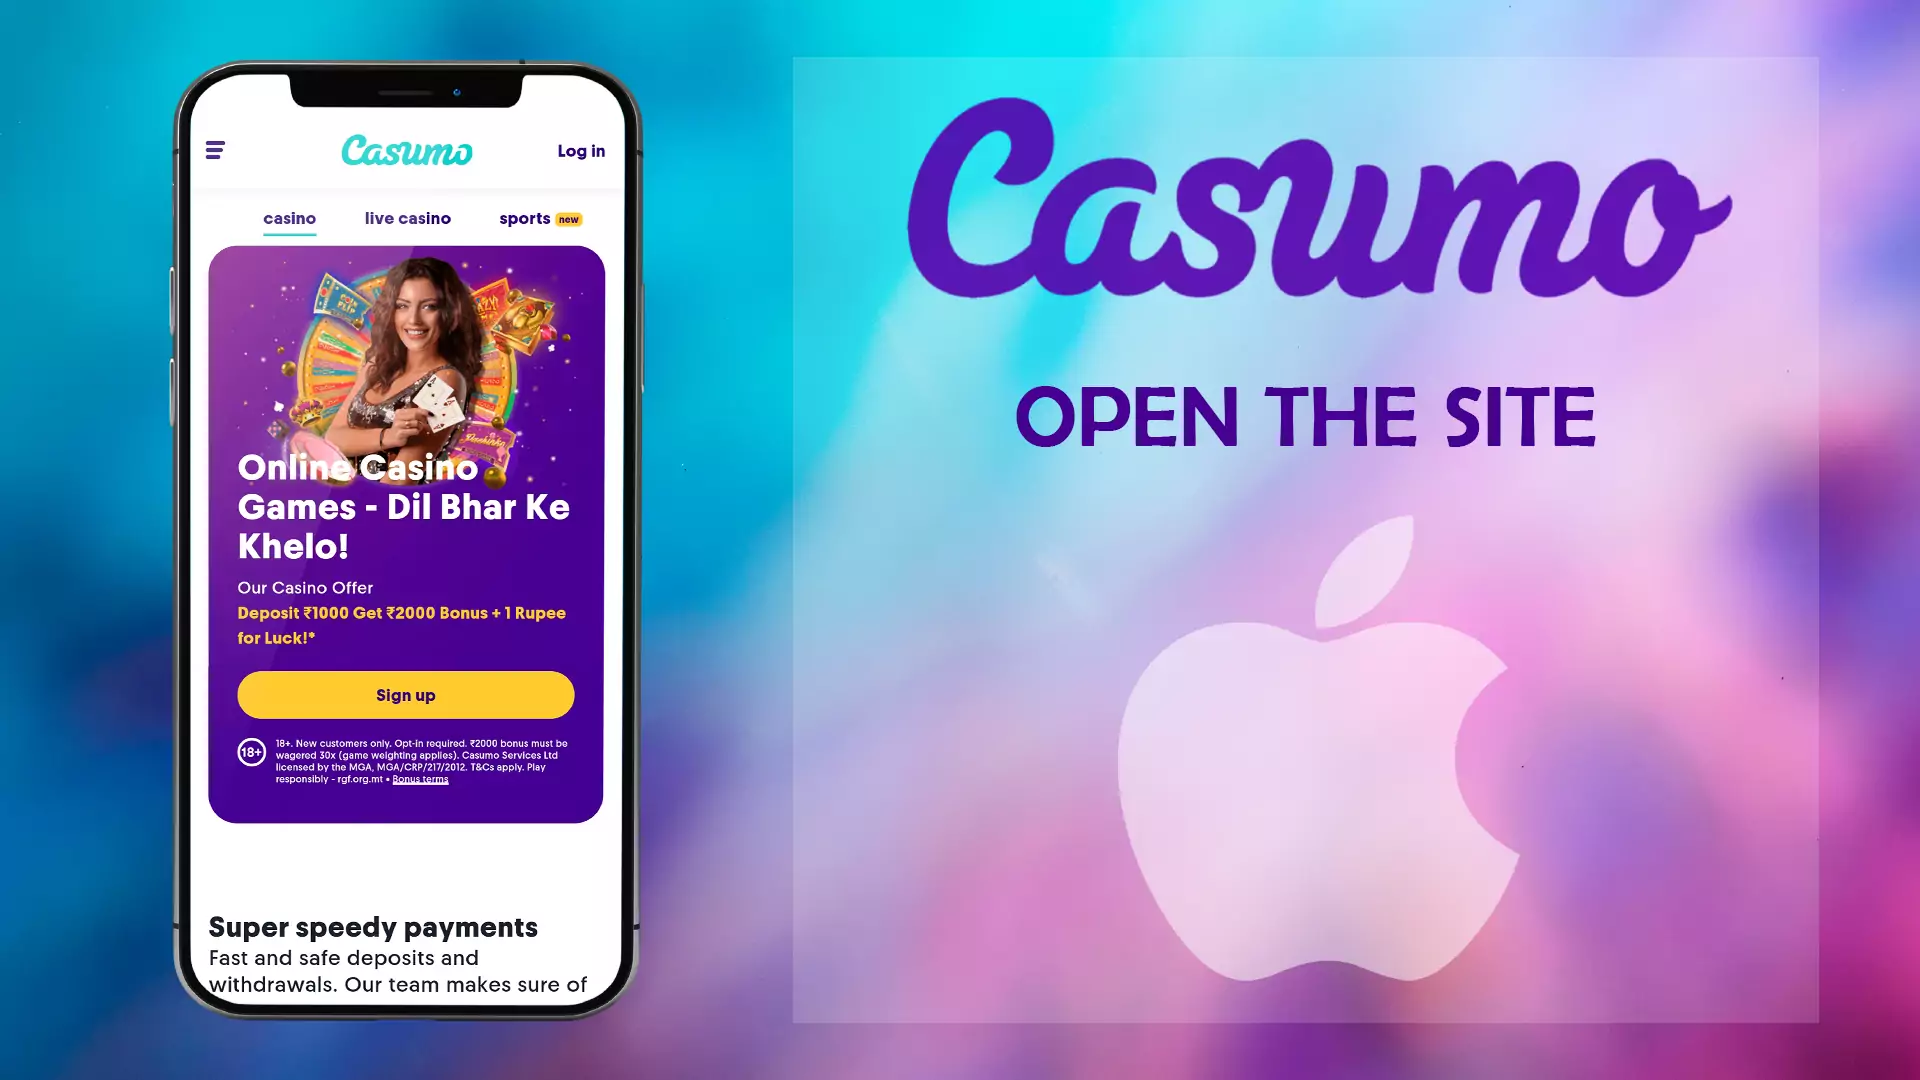 Visit the official website of Casumo.